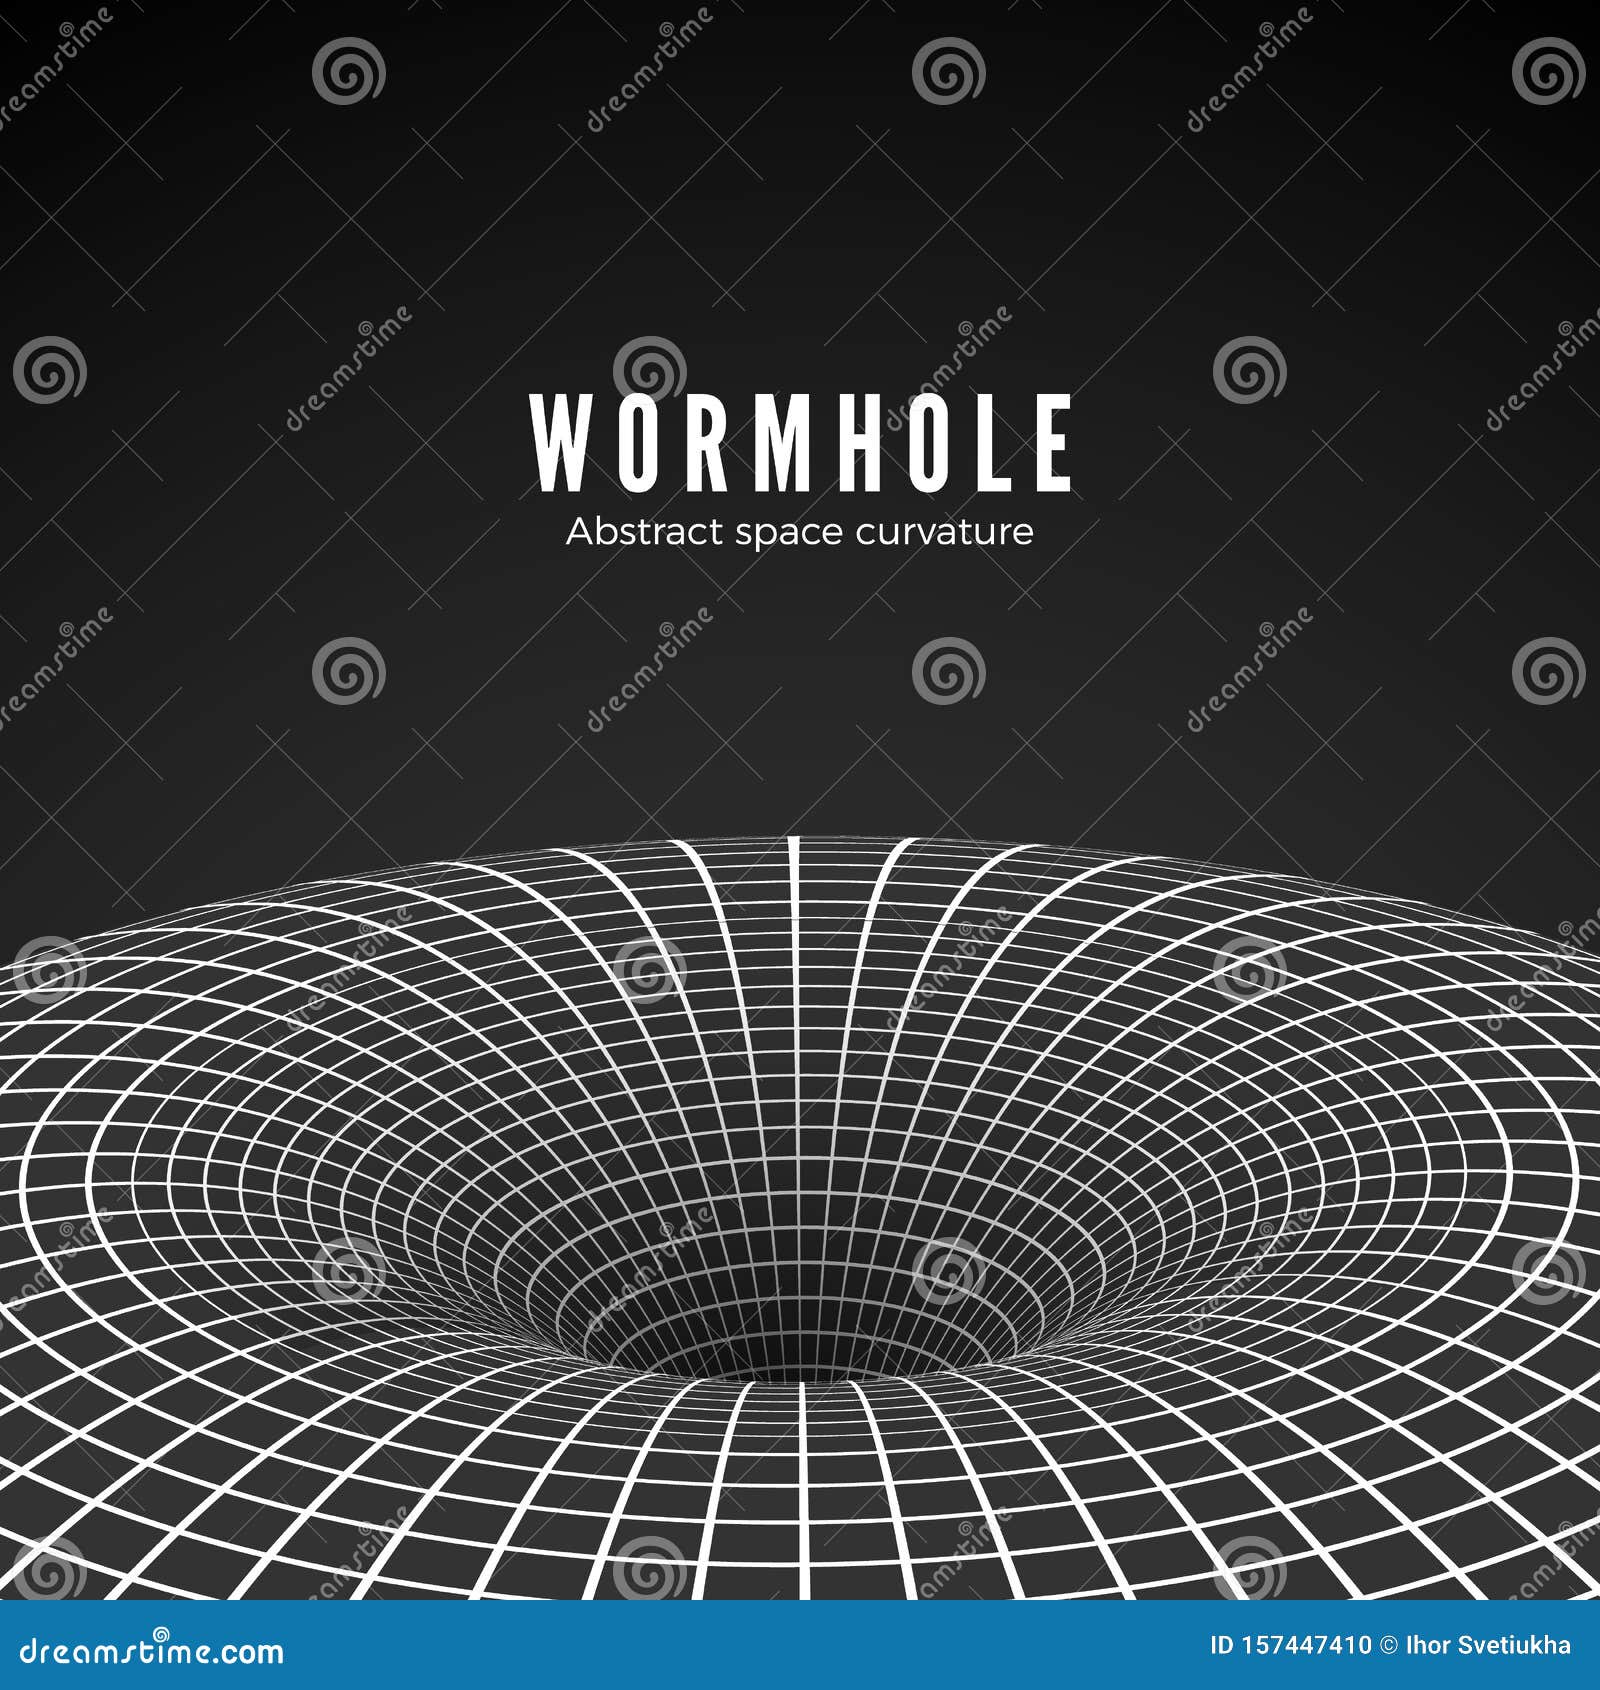 abstract black hole or wormhole. sci-fi digital  of portal though time and space. space curvature - funnel. 